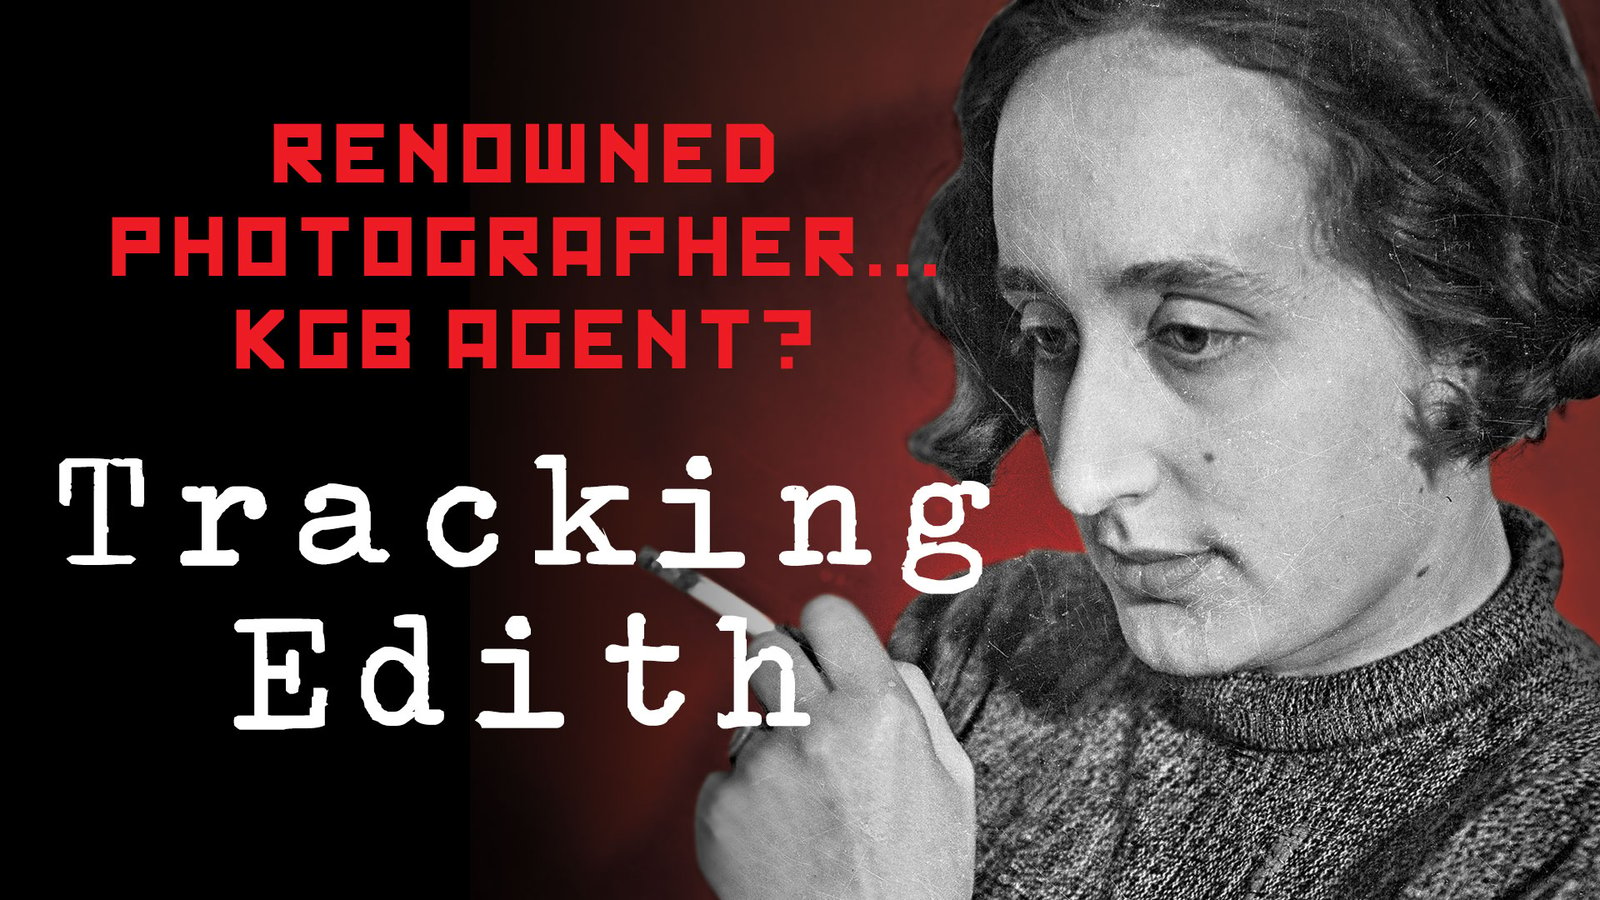 Tracking Edith - A Renowned Photographer and Secret Soviet Agent